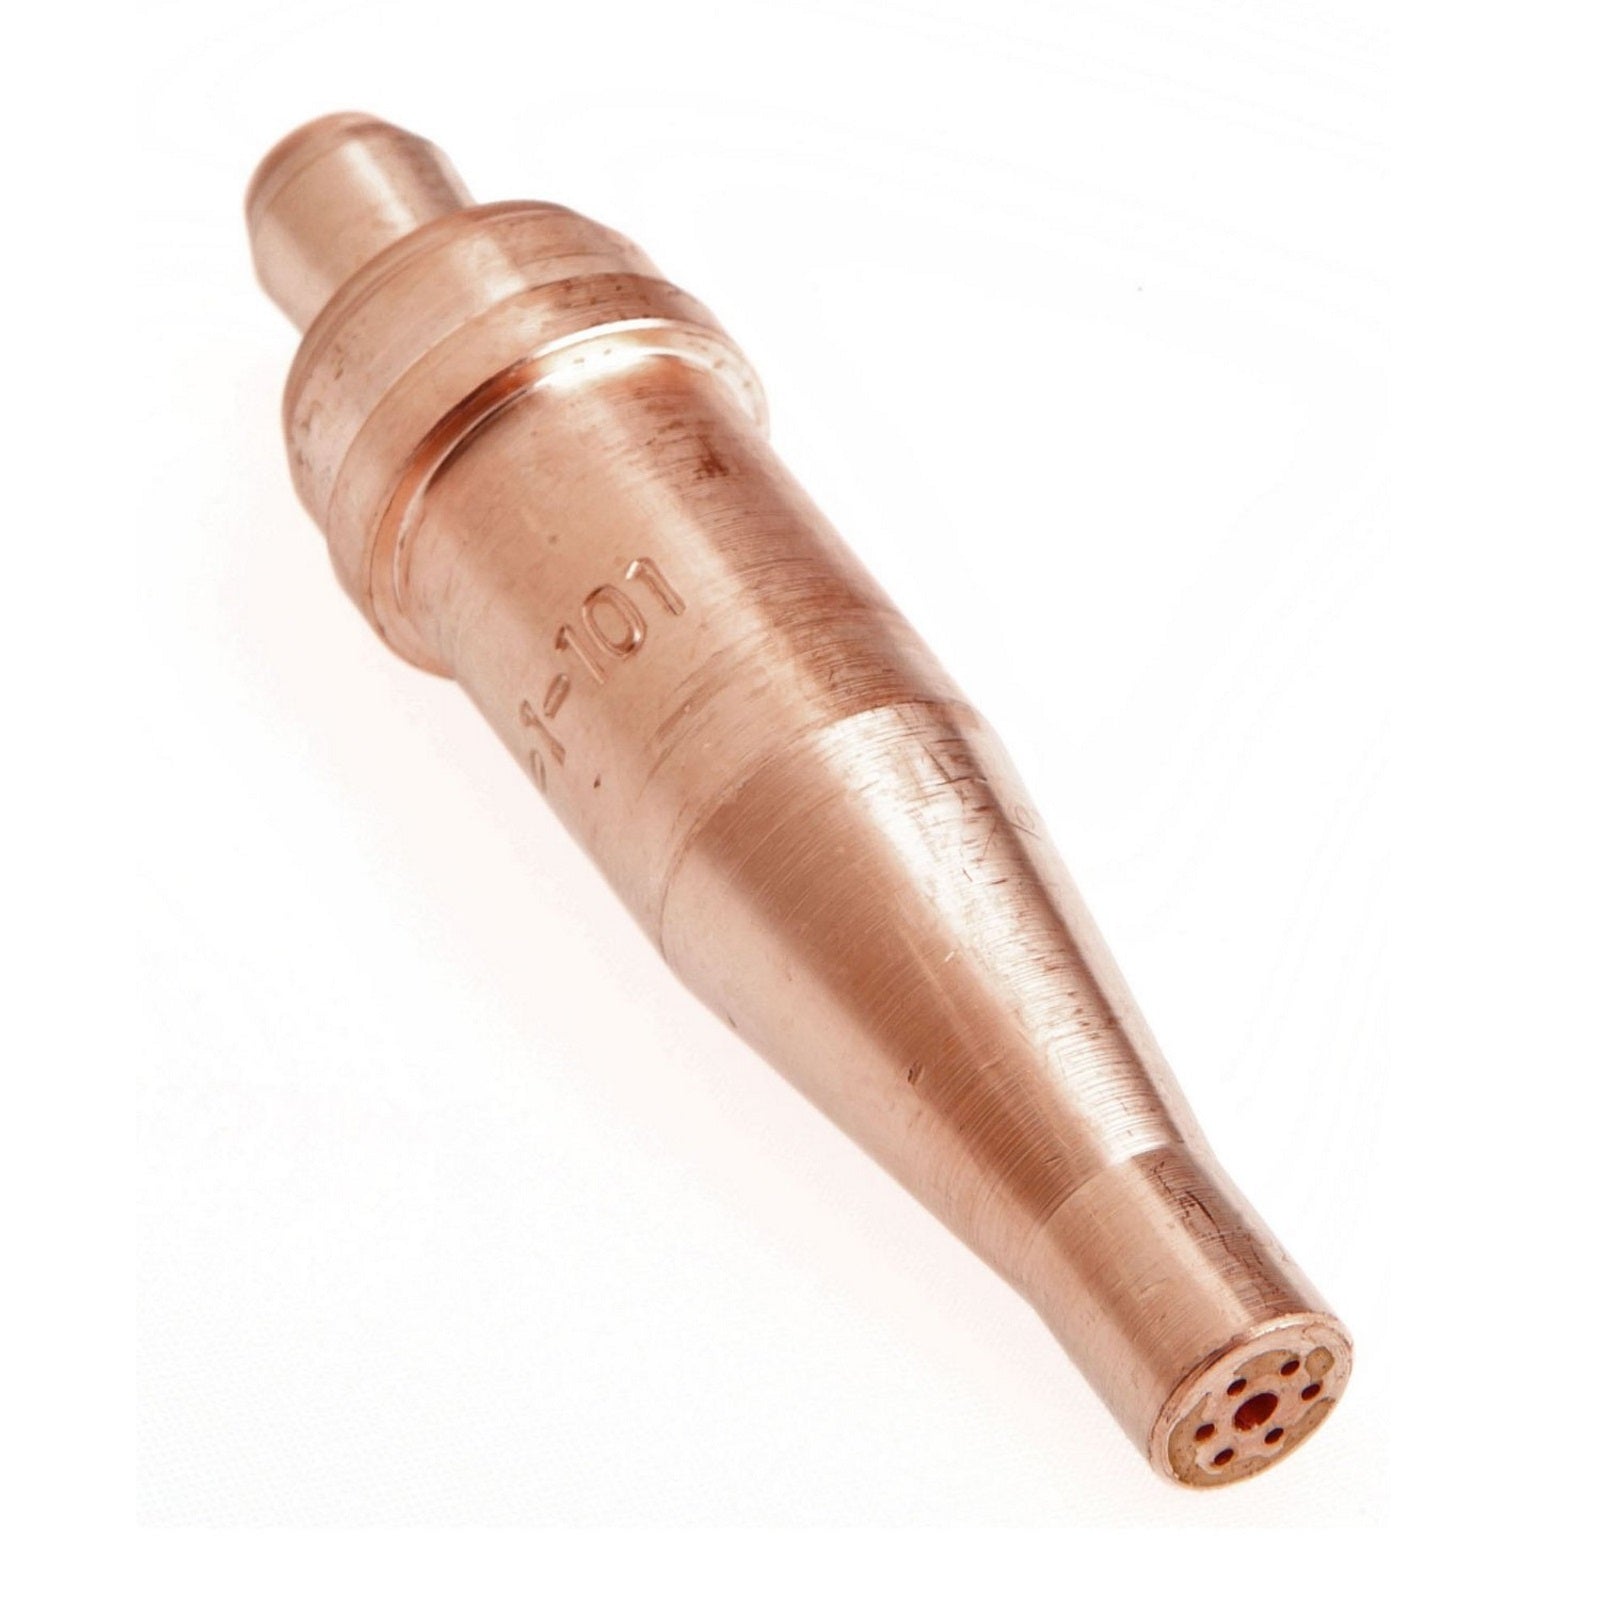 Victor Series 1 Type 101 Acetylene Cutting Tip - Size 4 (0330-0007)